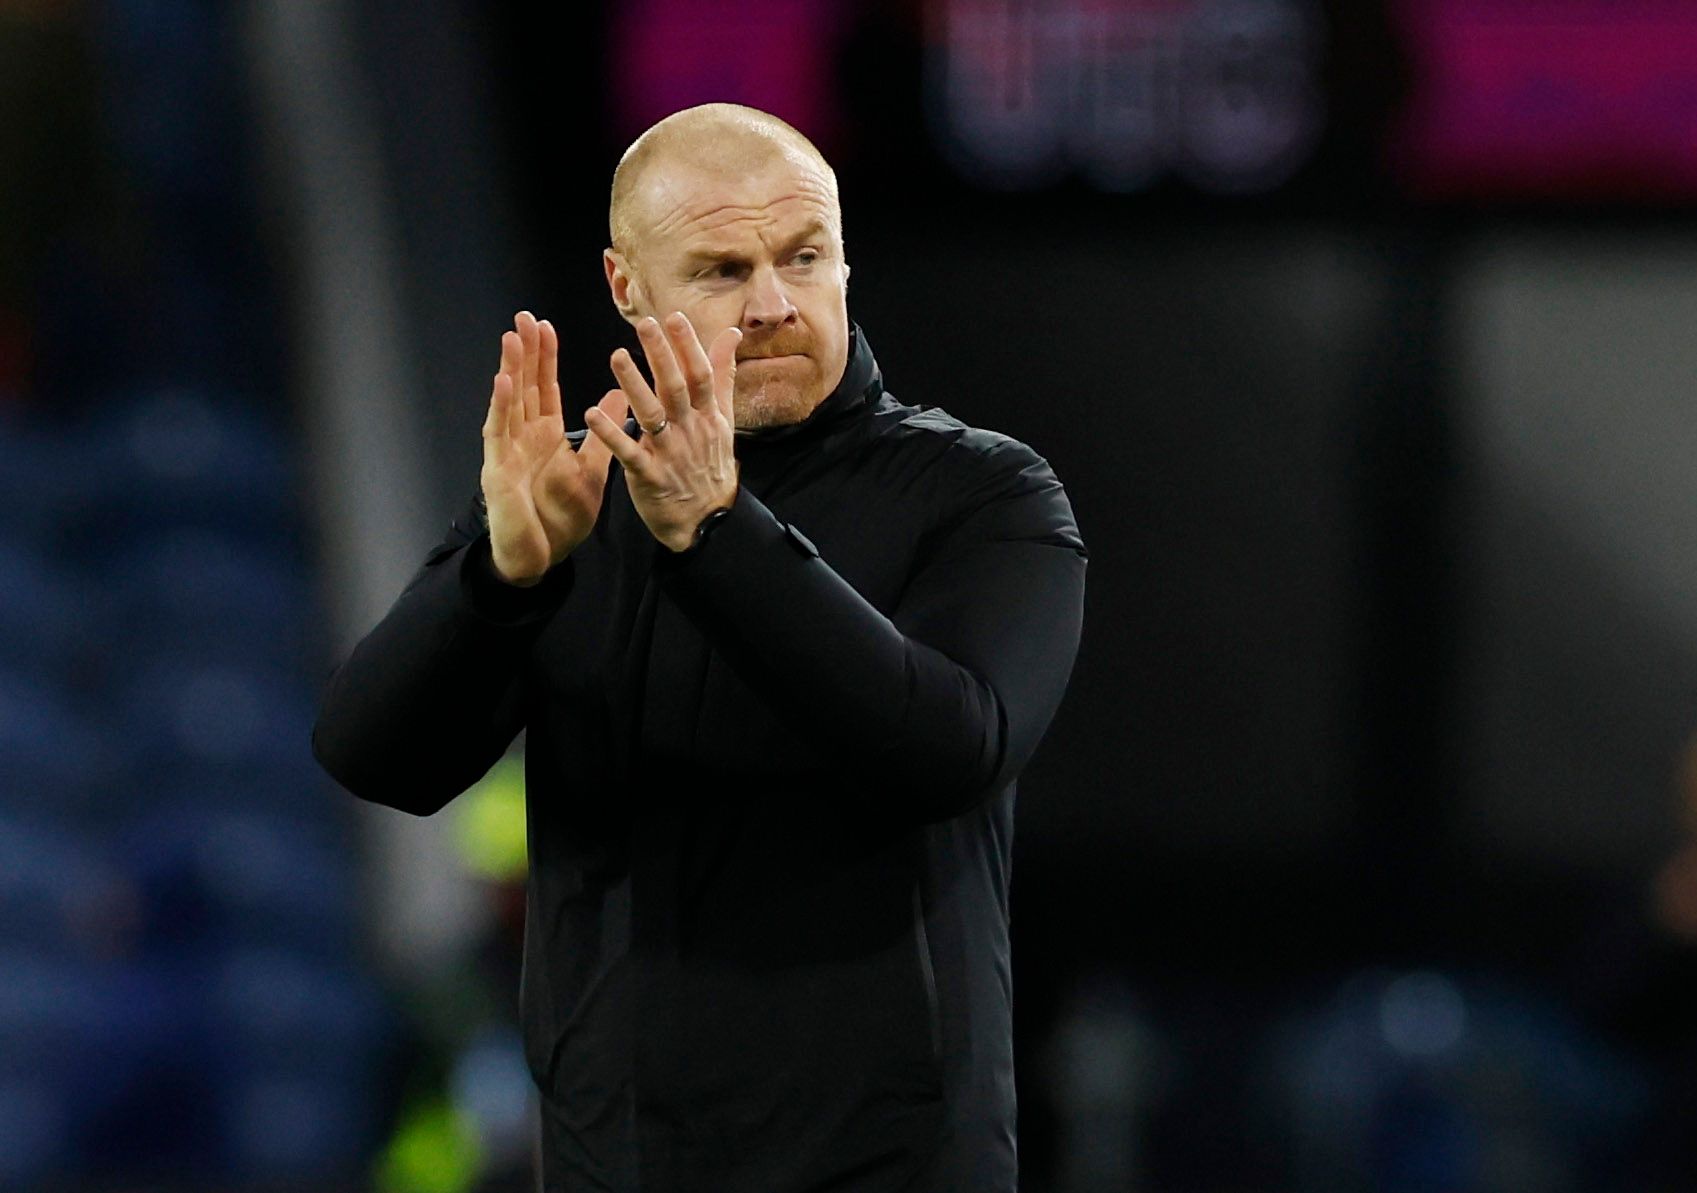 Everton: Sean Dyche may ‘fancy his chances’ of succeeding Frank Lampard -Everton News